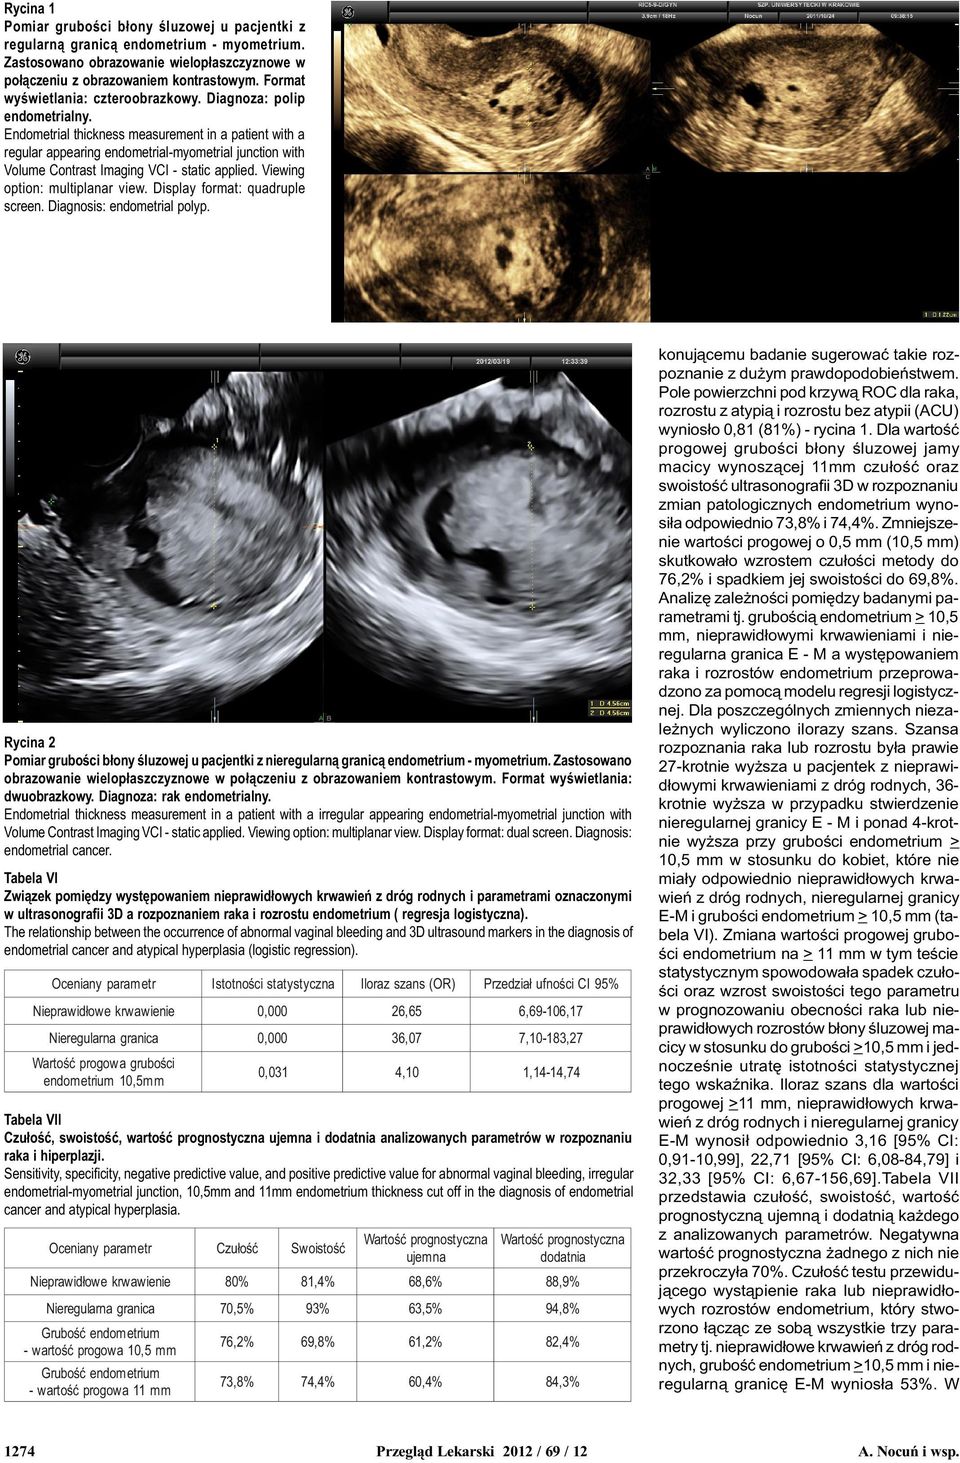 Endometrial thickness measurement in a patient with a regular appearing endometrial-myometrial junction with Volume Contrast Imaging VCI - static applied. Viewing option: multiplanar view.